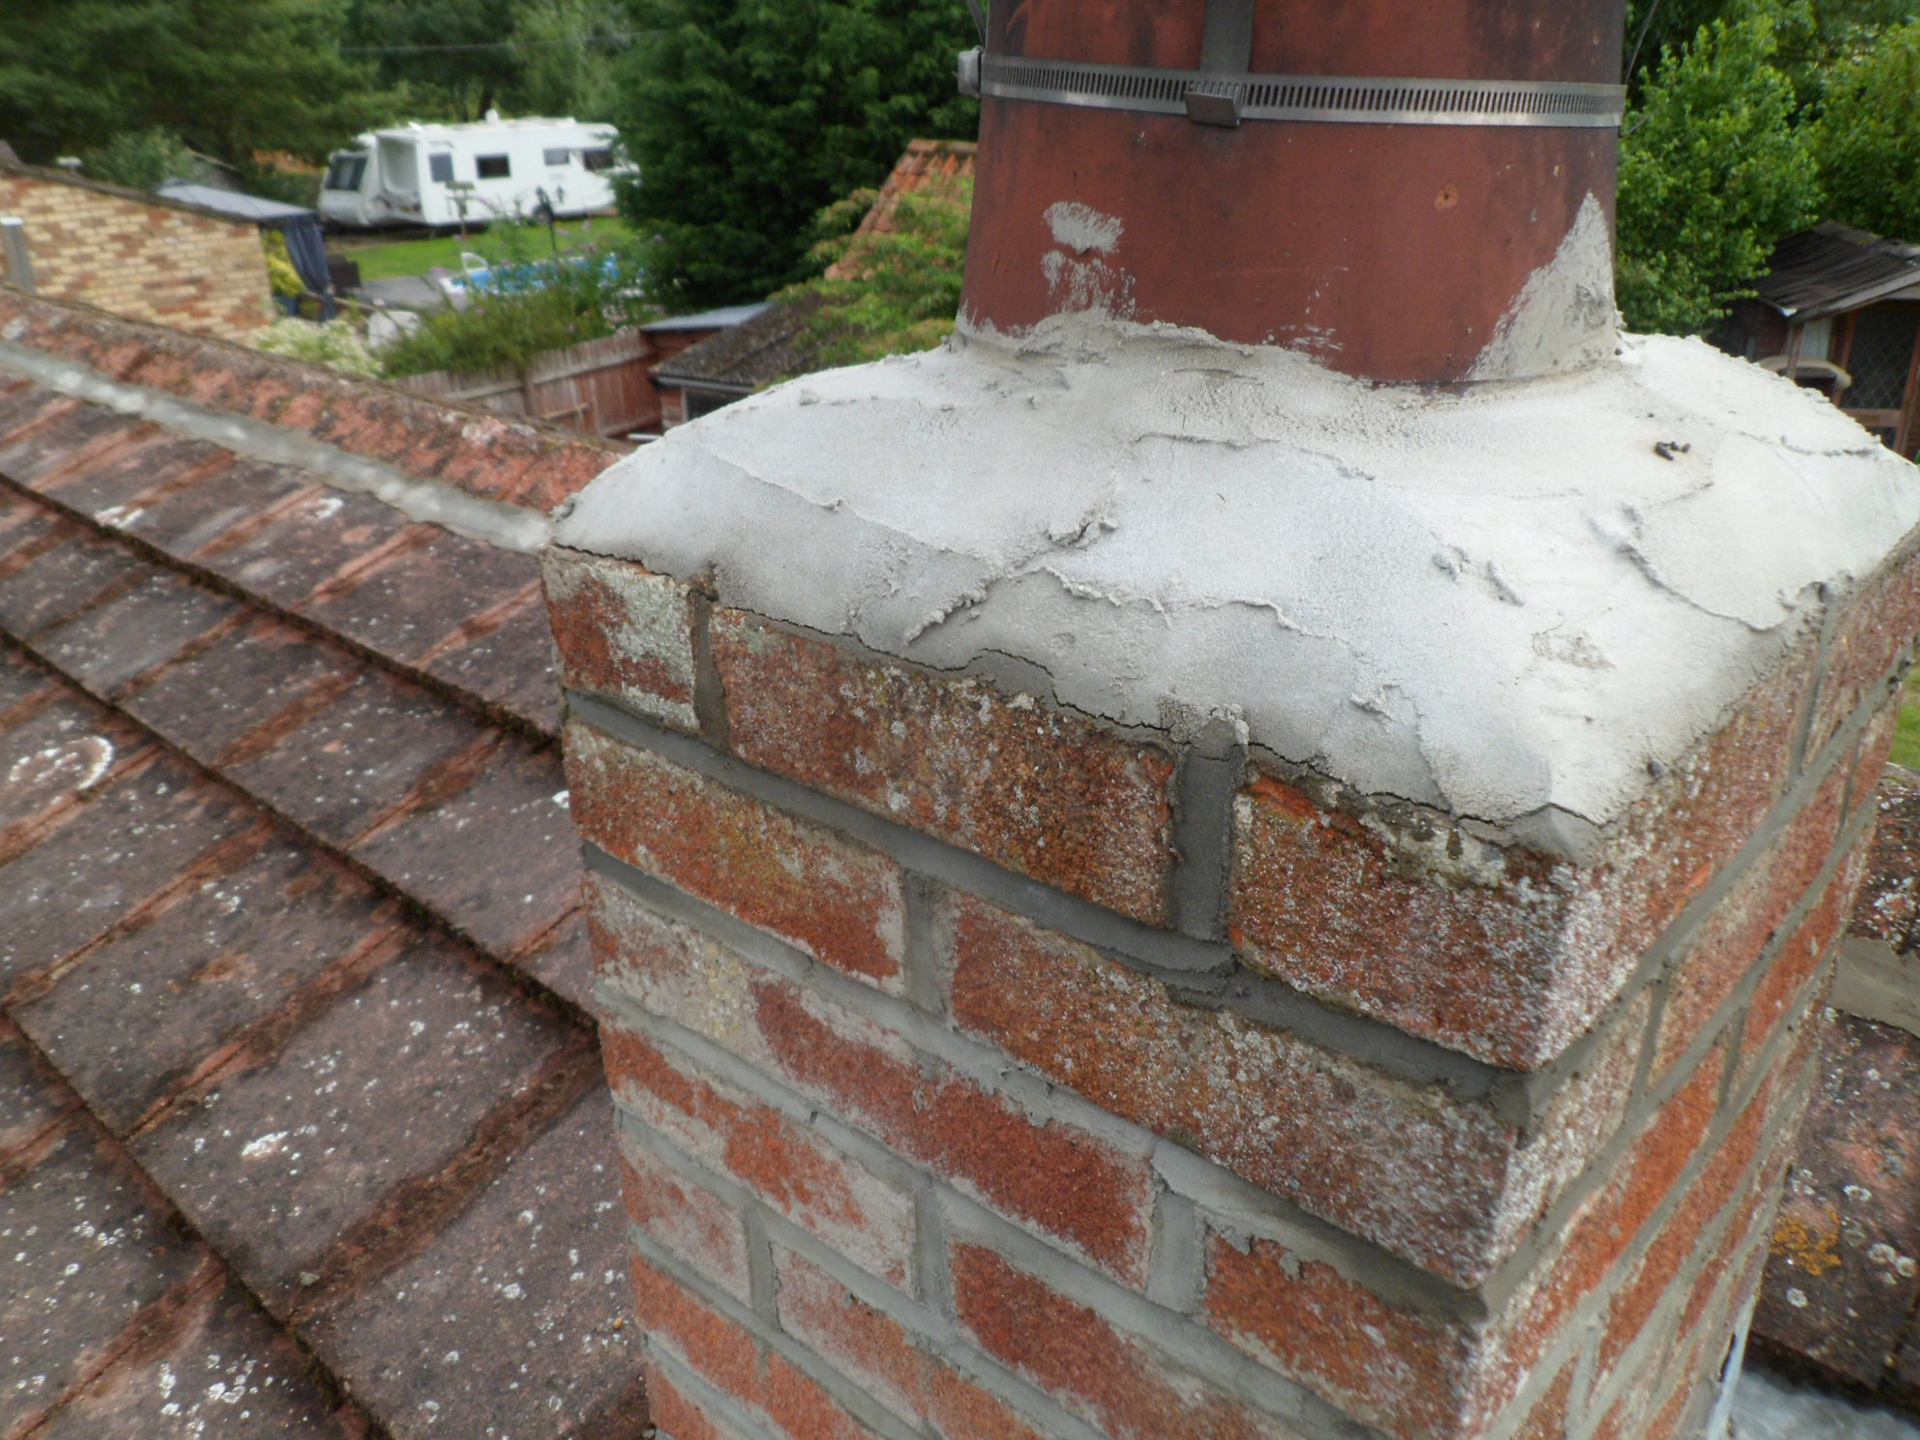 A chimney on a house roof